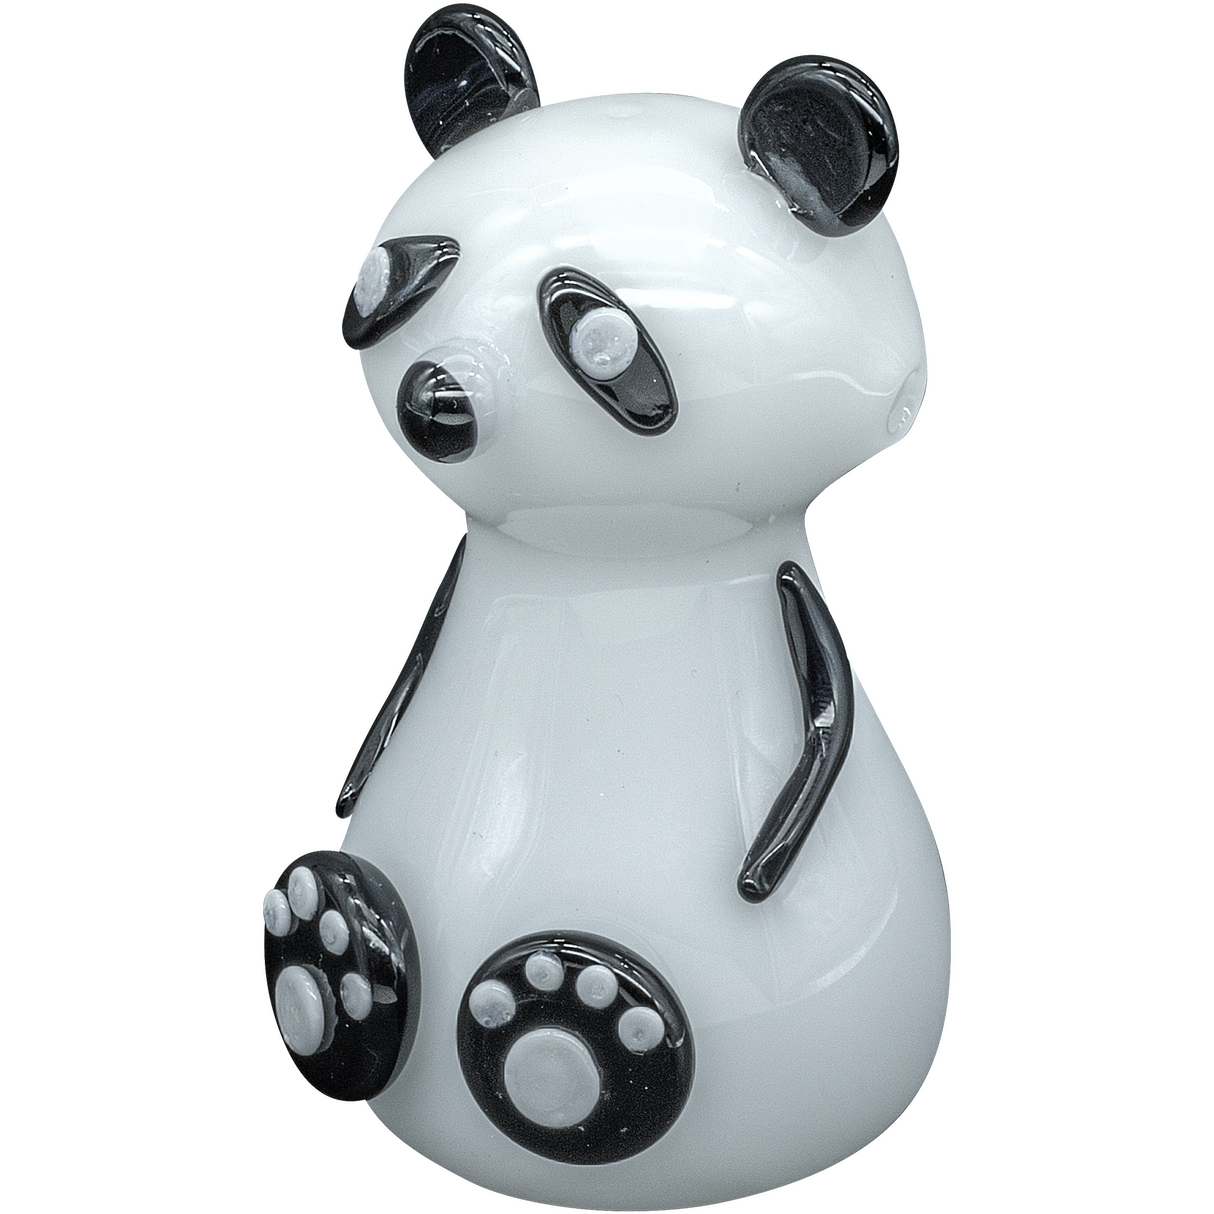 LA Pipes "Bored Panda" Glass Pipe - Front View for Dry Herbs, 4" Borosilicate